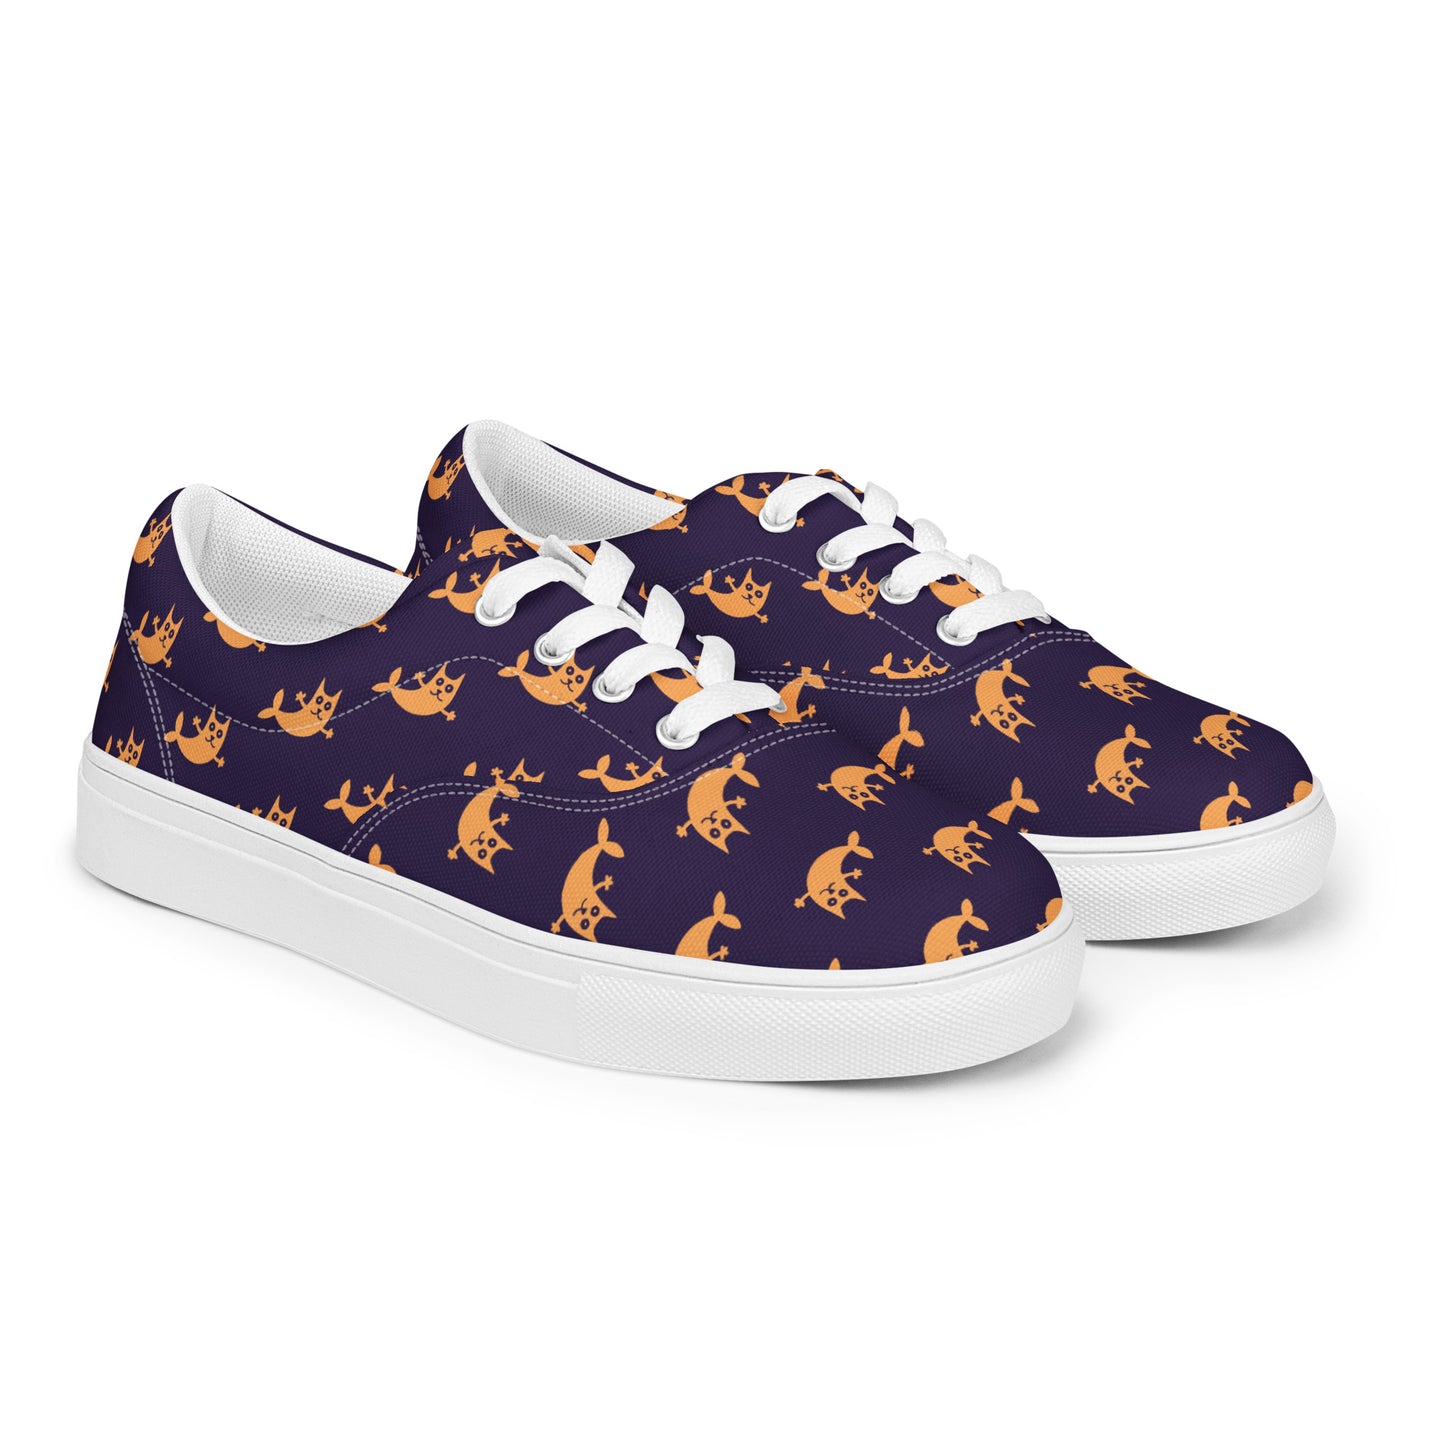 Mer-Kitty Women’s Handmade Lace-up Canvas Skater Shoes